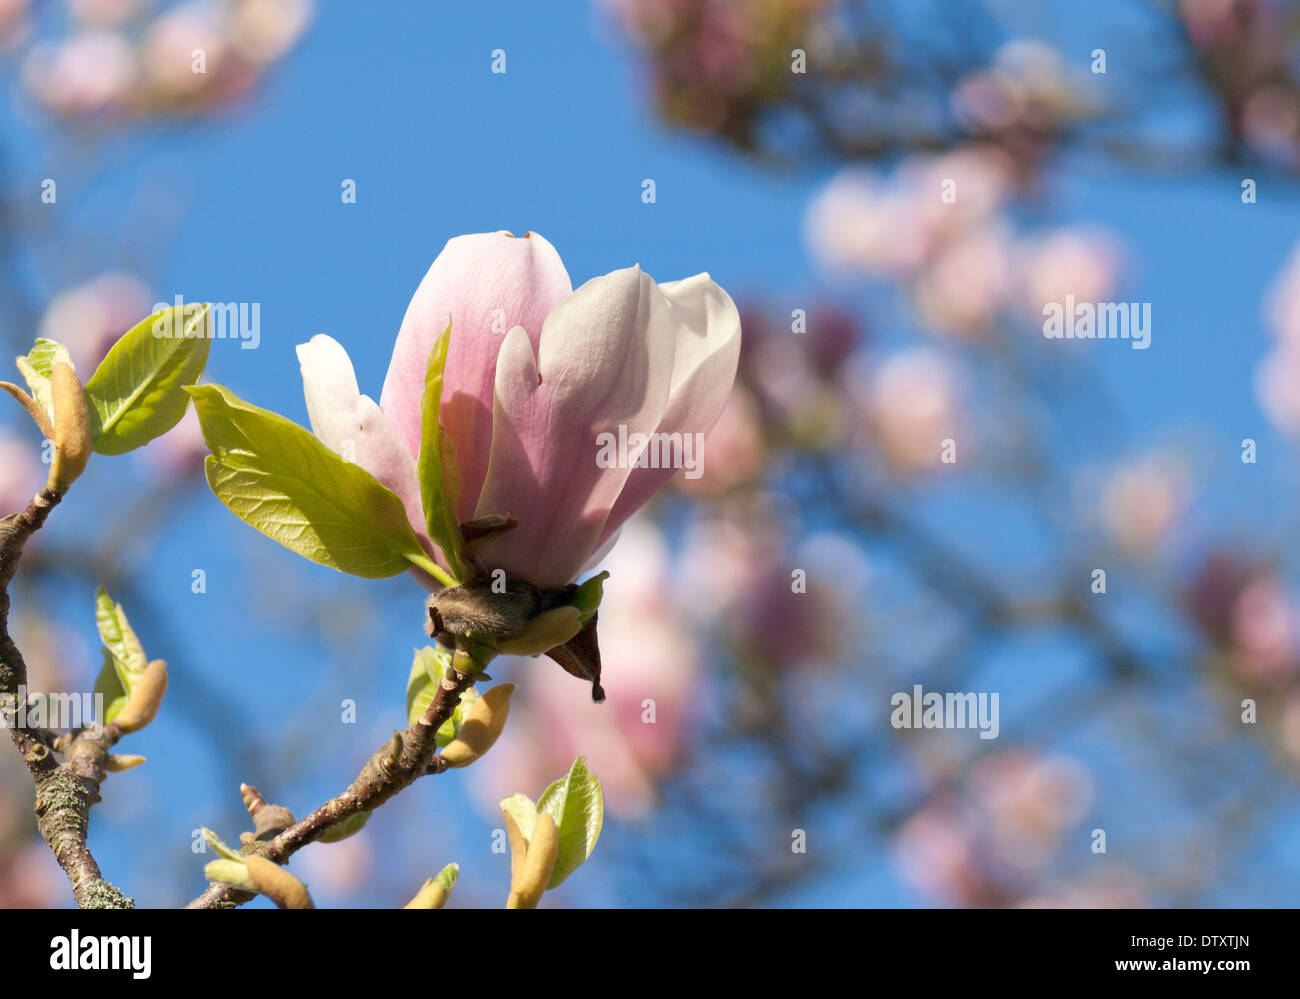 A magnolia blossom from the signature magnolia trees outside of the Main University Building at Lund University in Lund, Sweden. Stock Photo